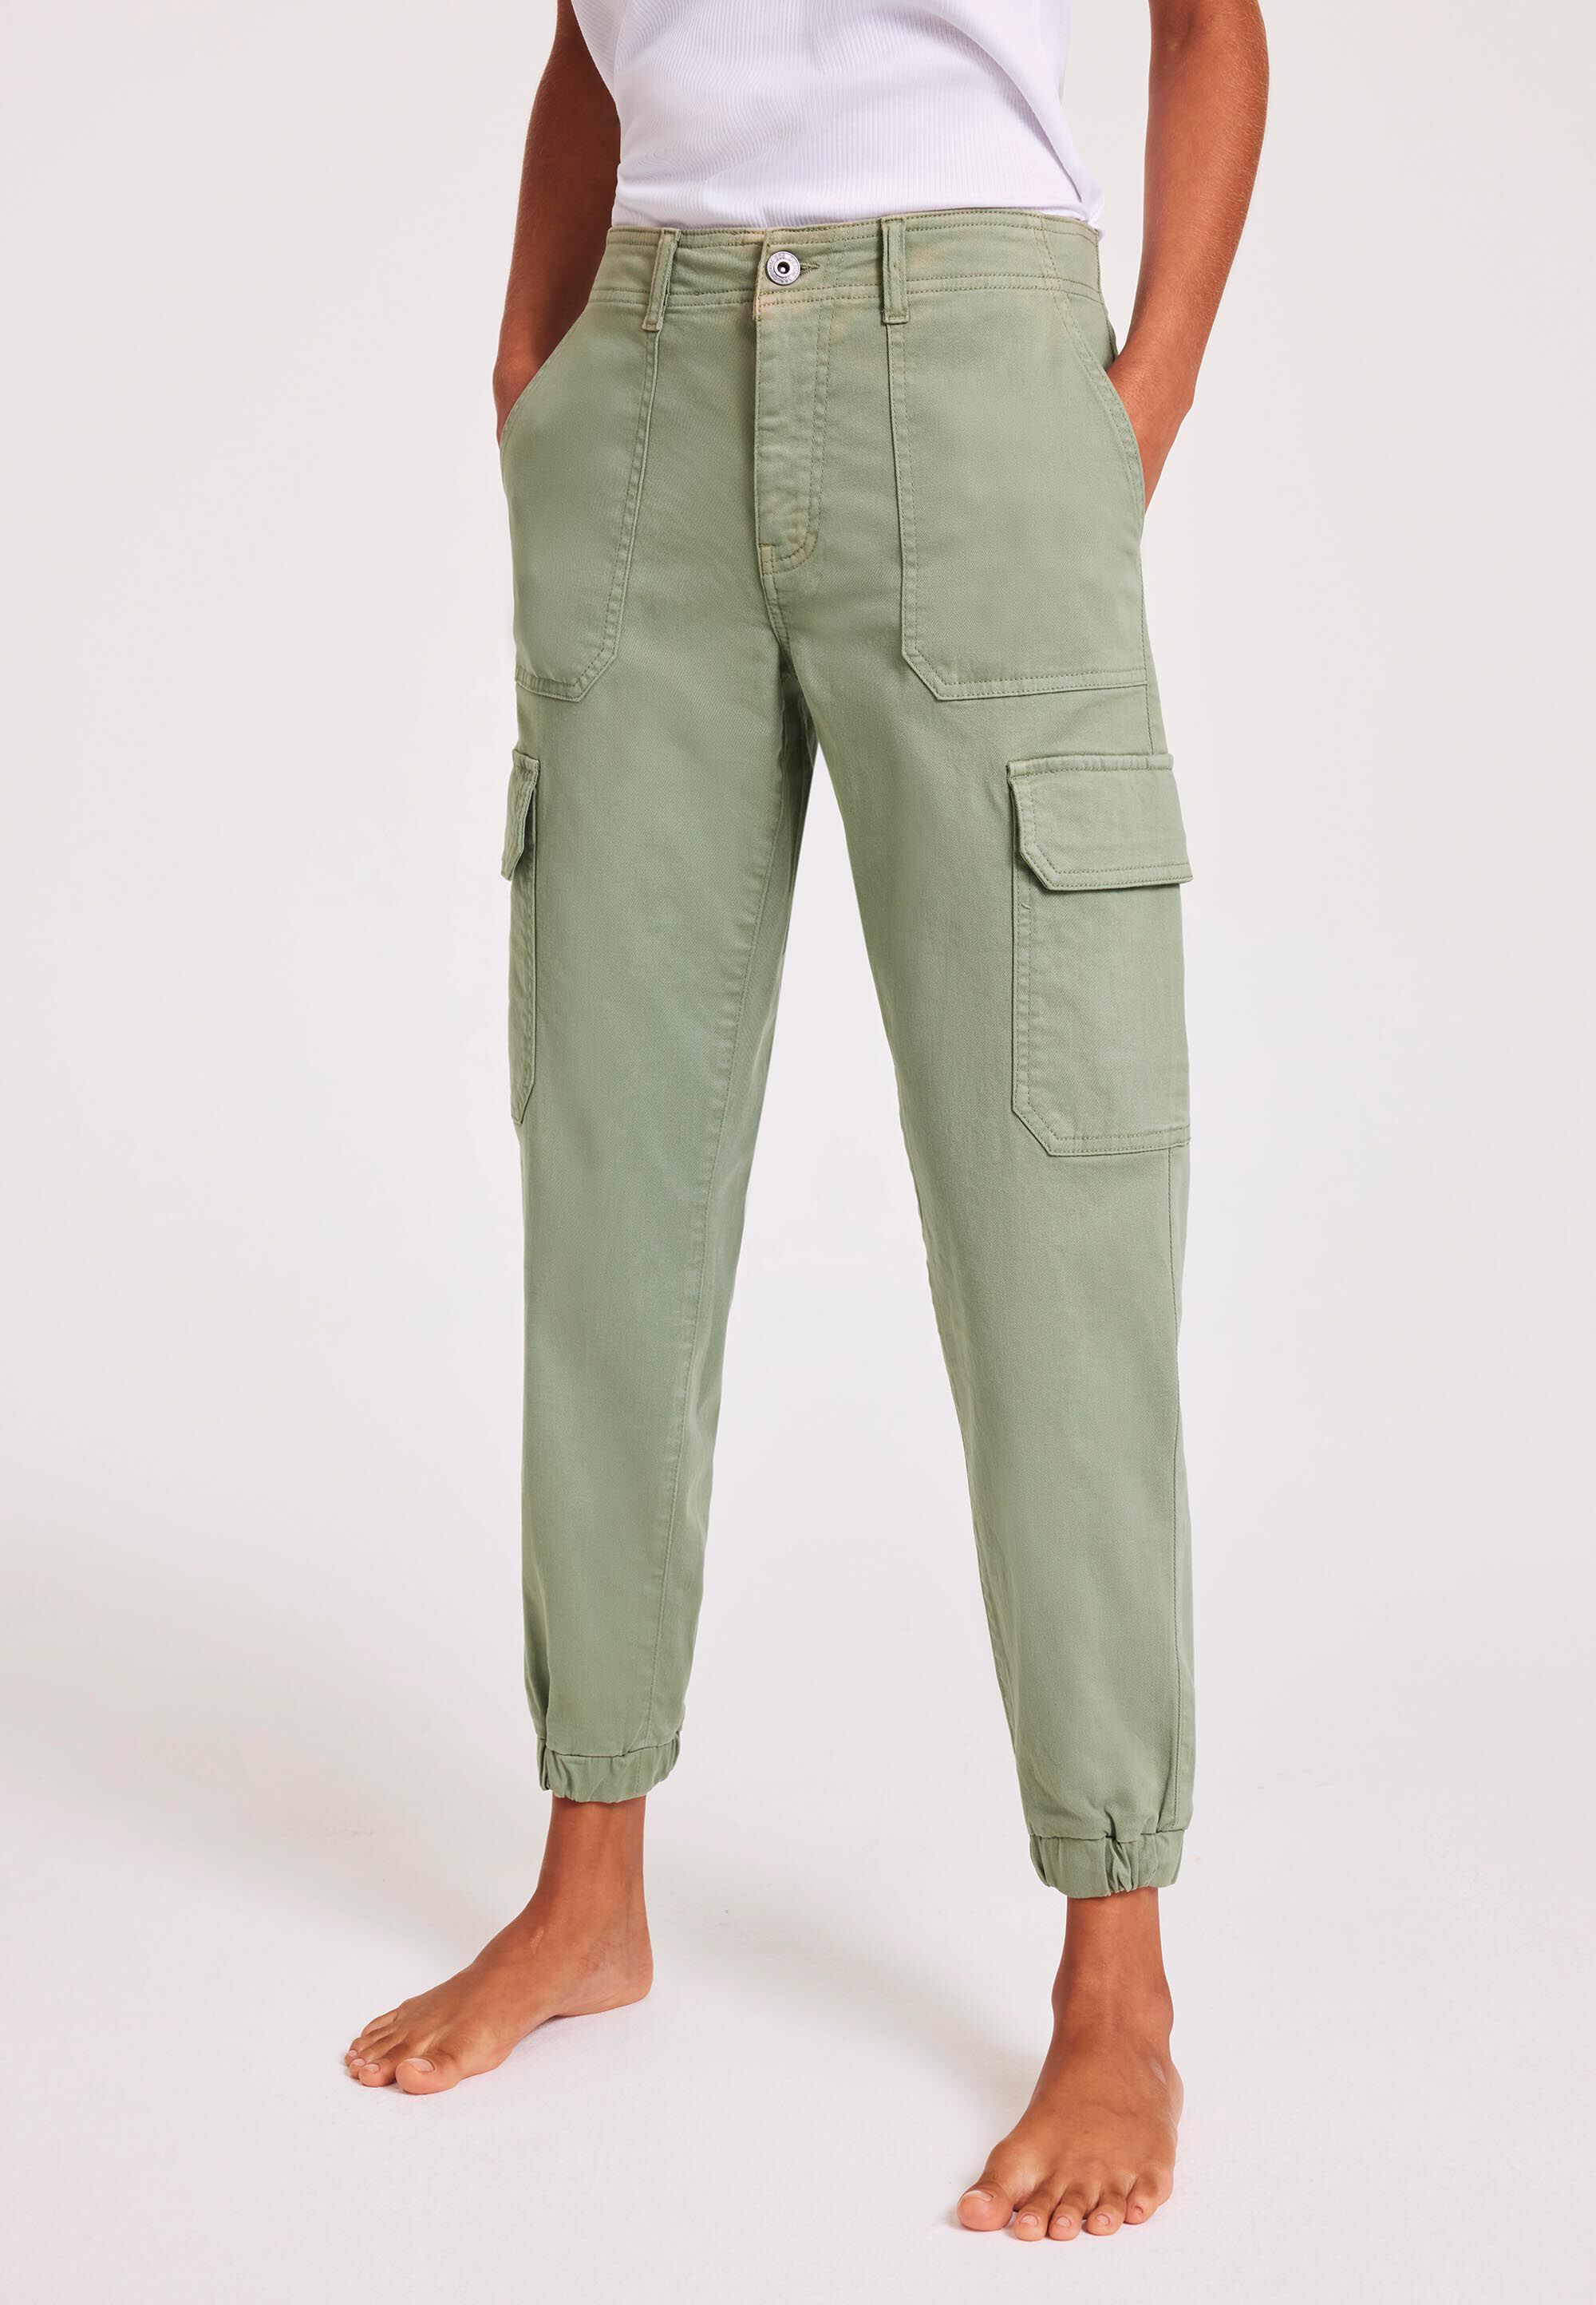 Pants with Cuffs for Women | Sumissura